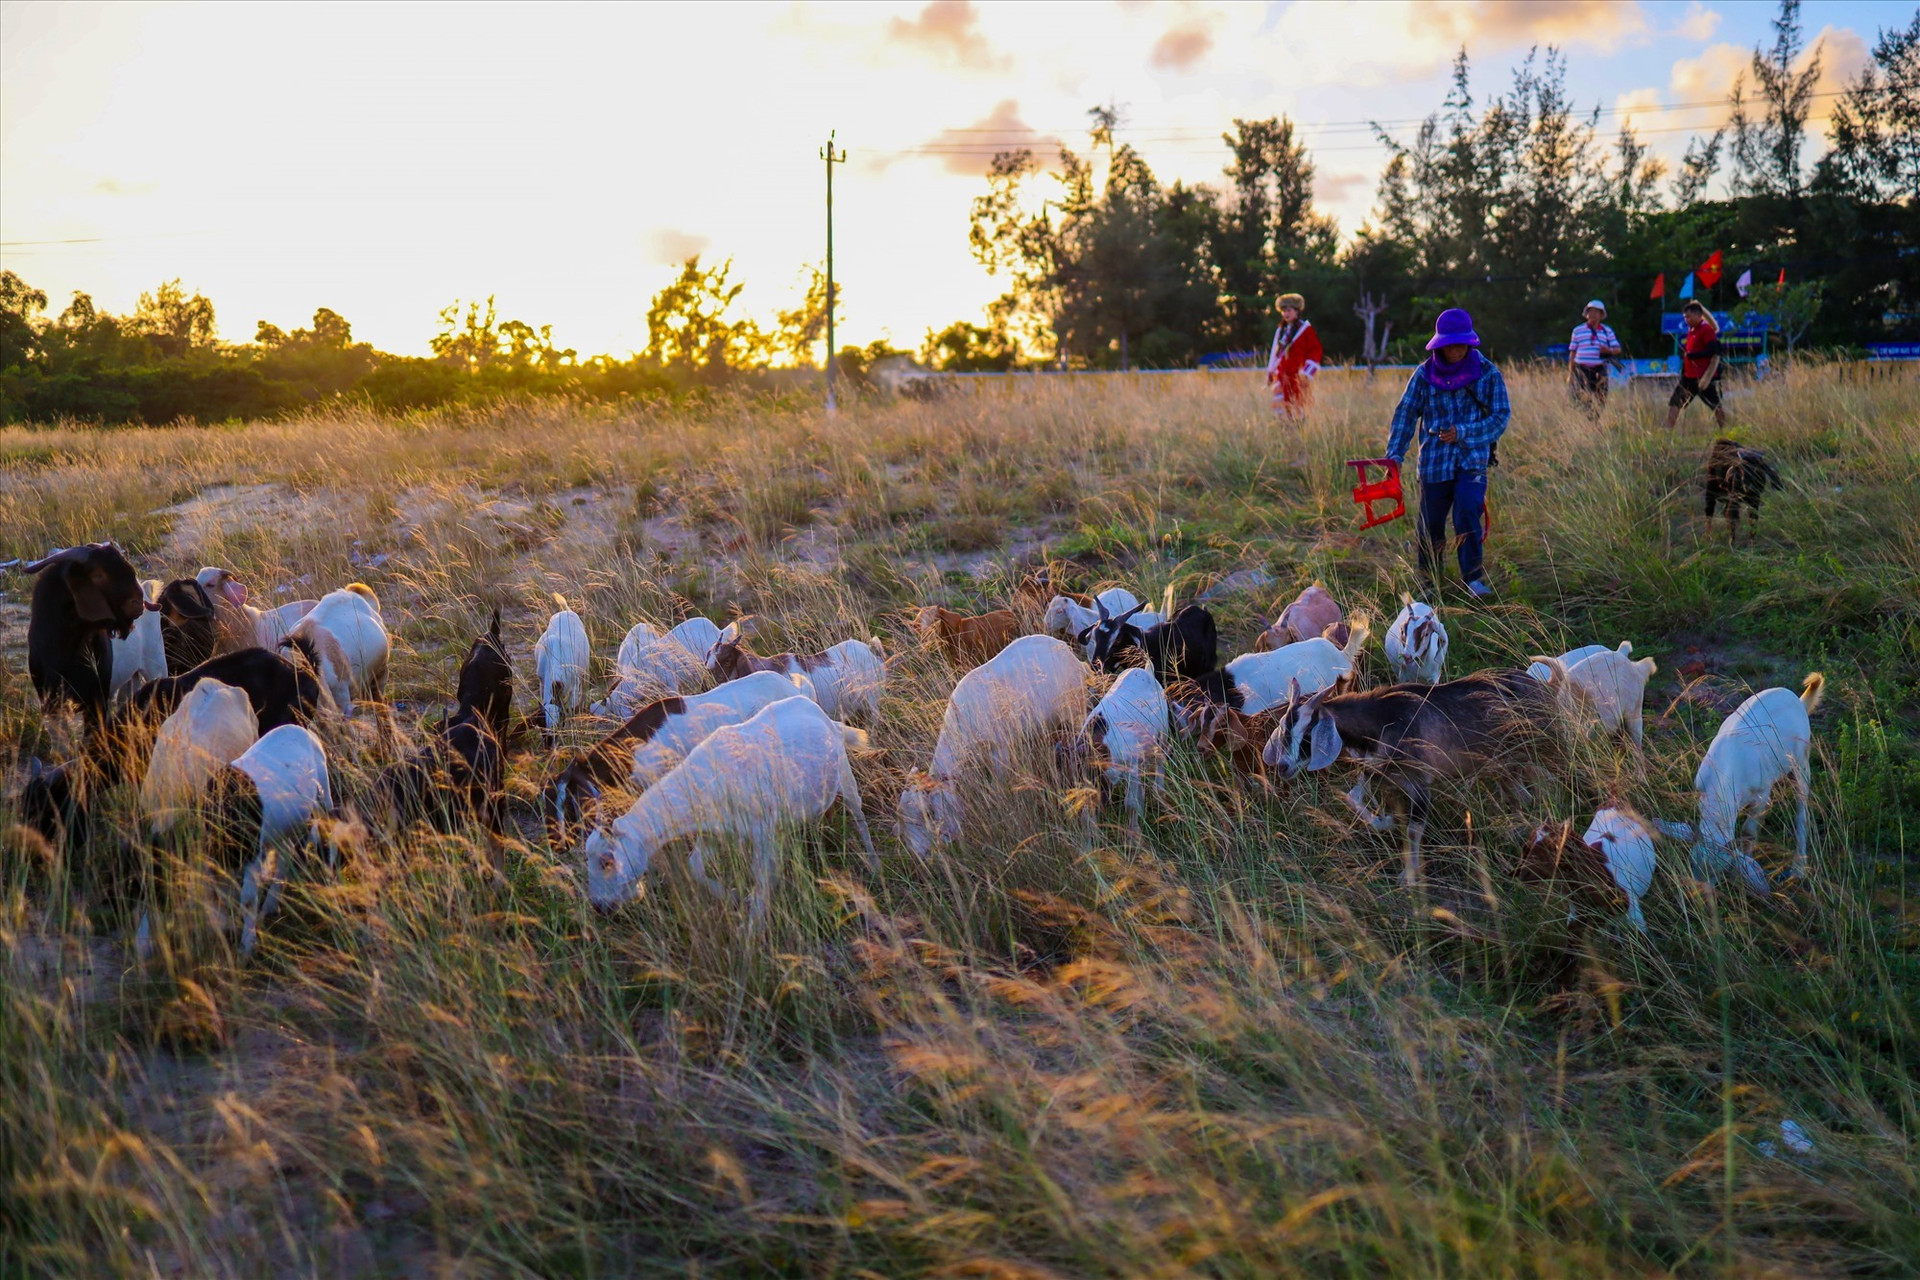 Goats happily nibble on grass, roaming and playing in the meadows